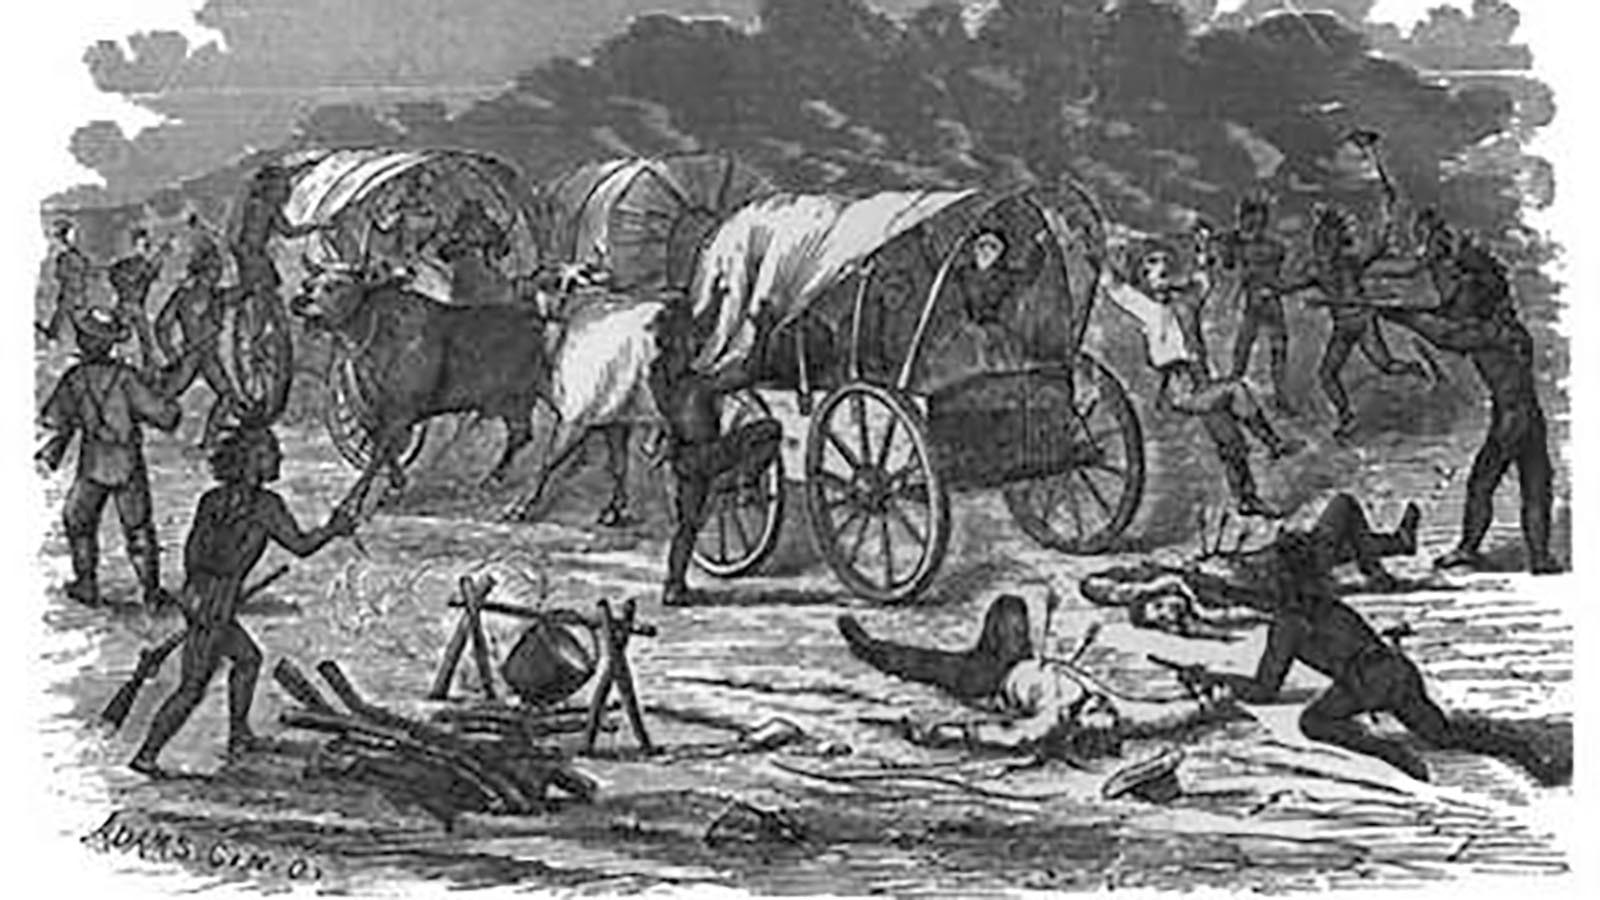 Artist's conception of the wagon train attack, from Fanny Kelly's 1871 book "My Captivity among the Sioux Indians."